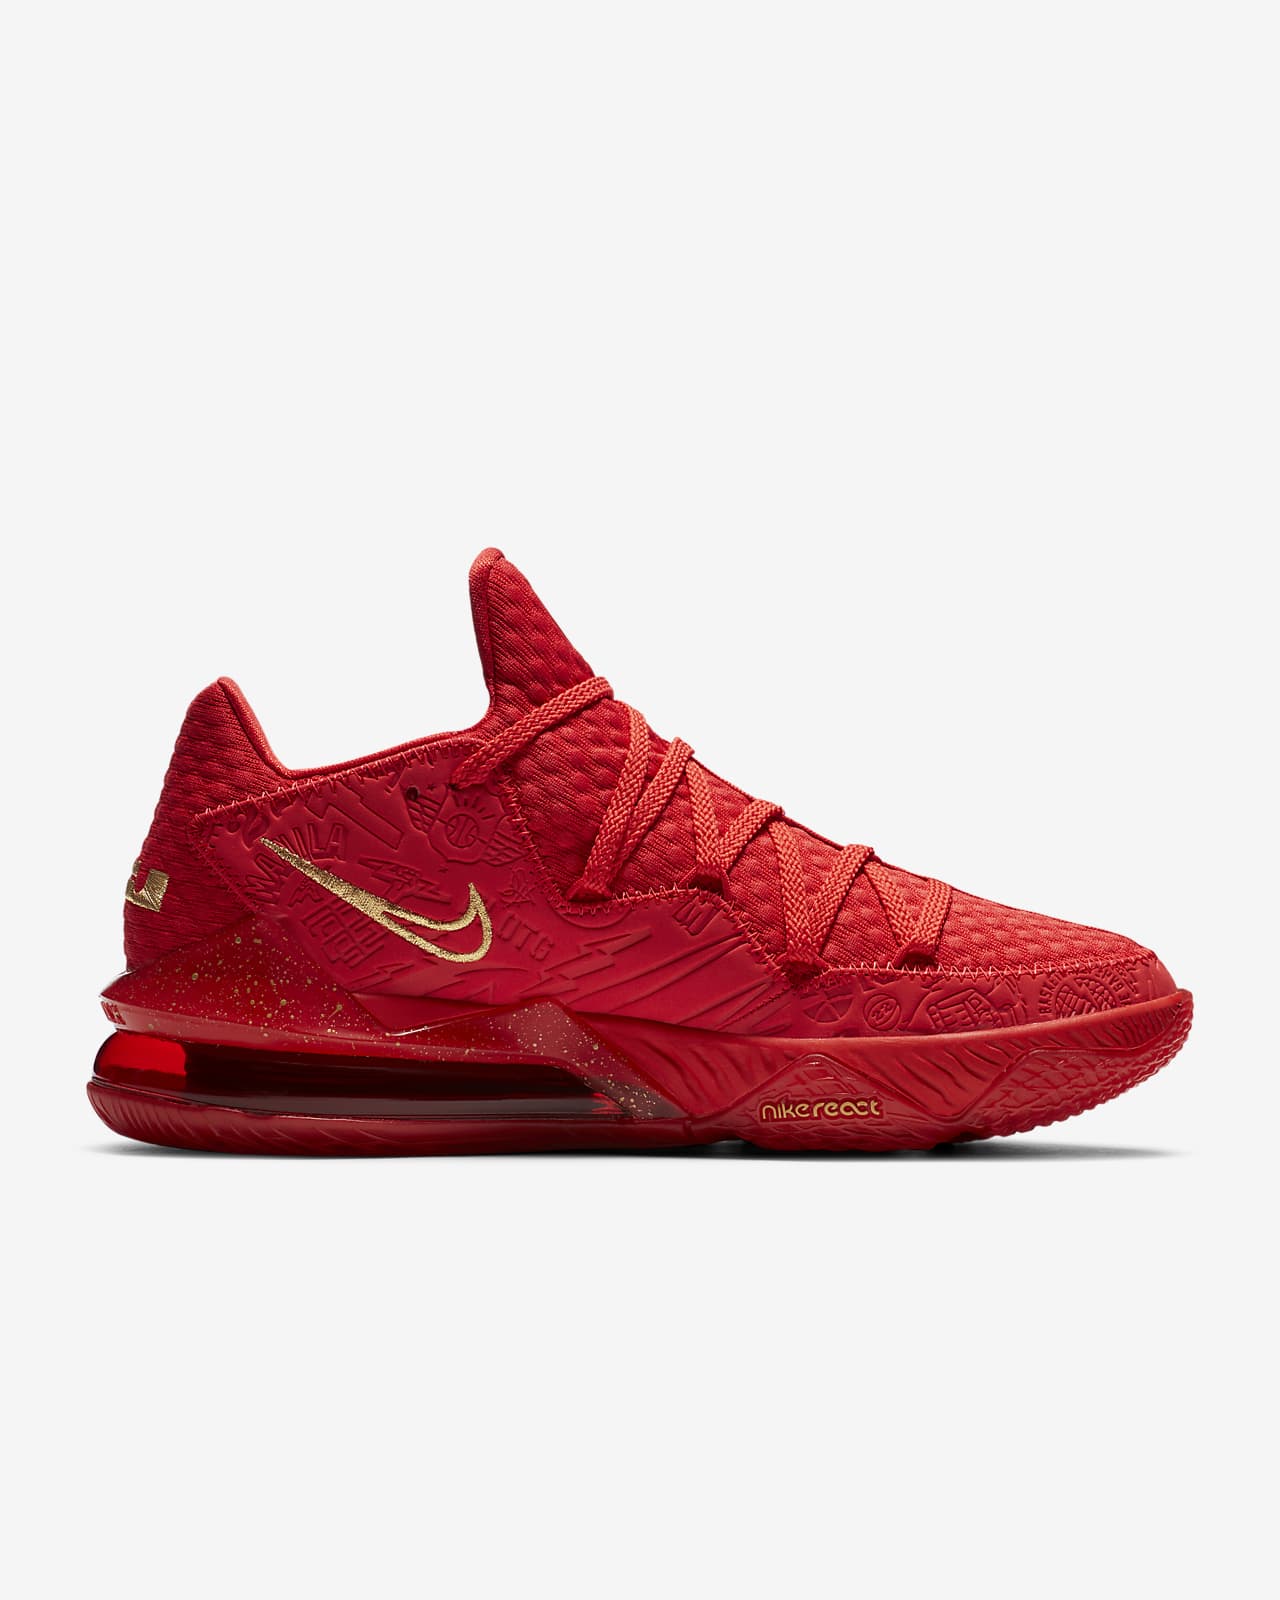 lebron 17 red low